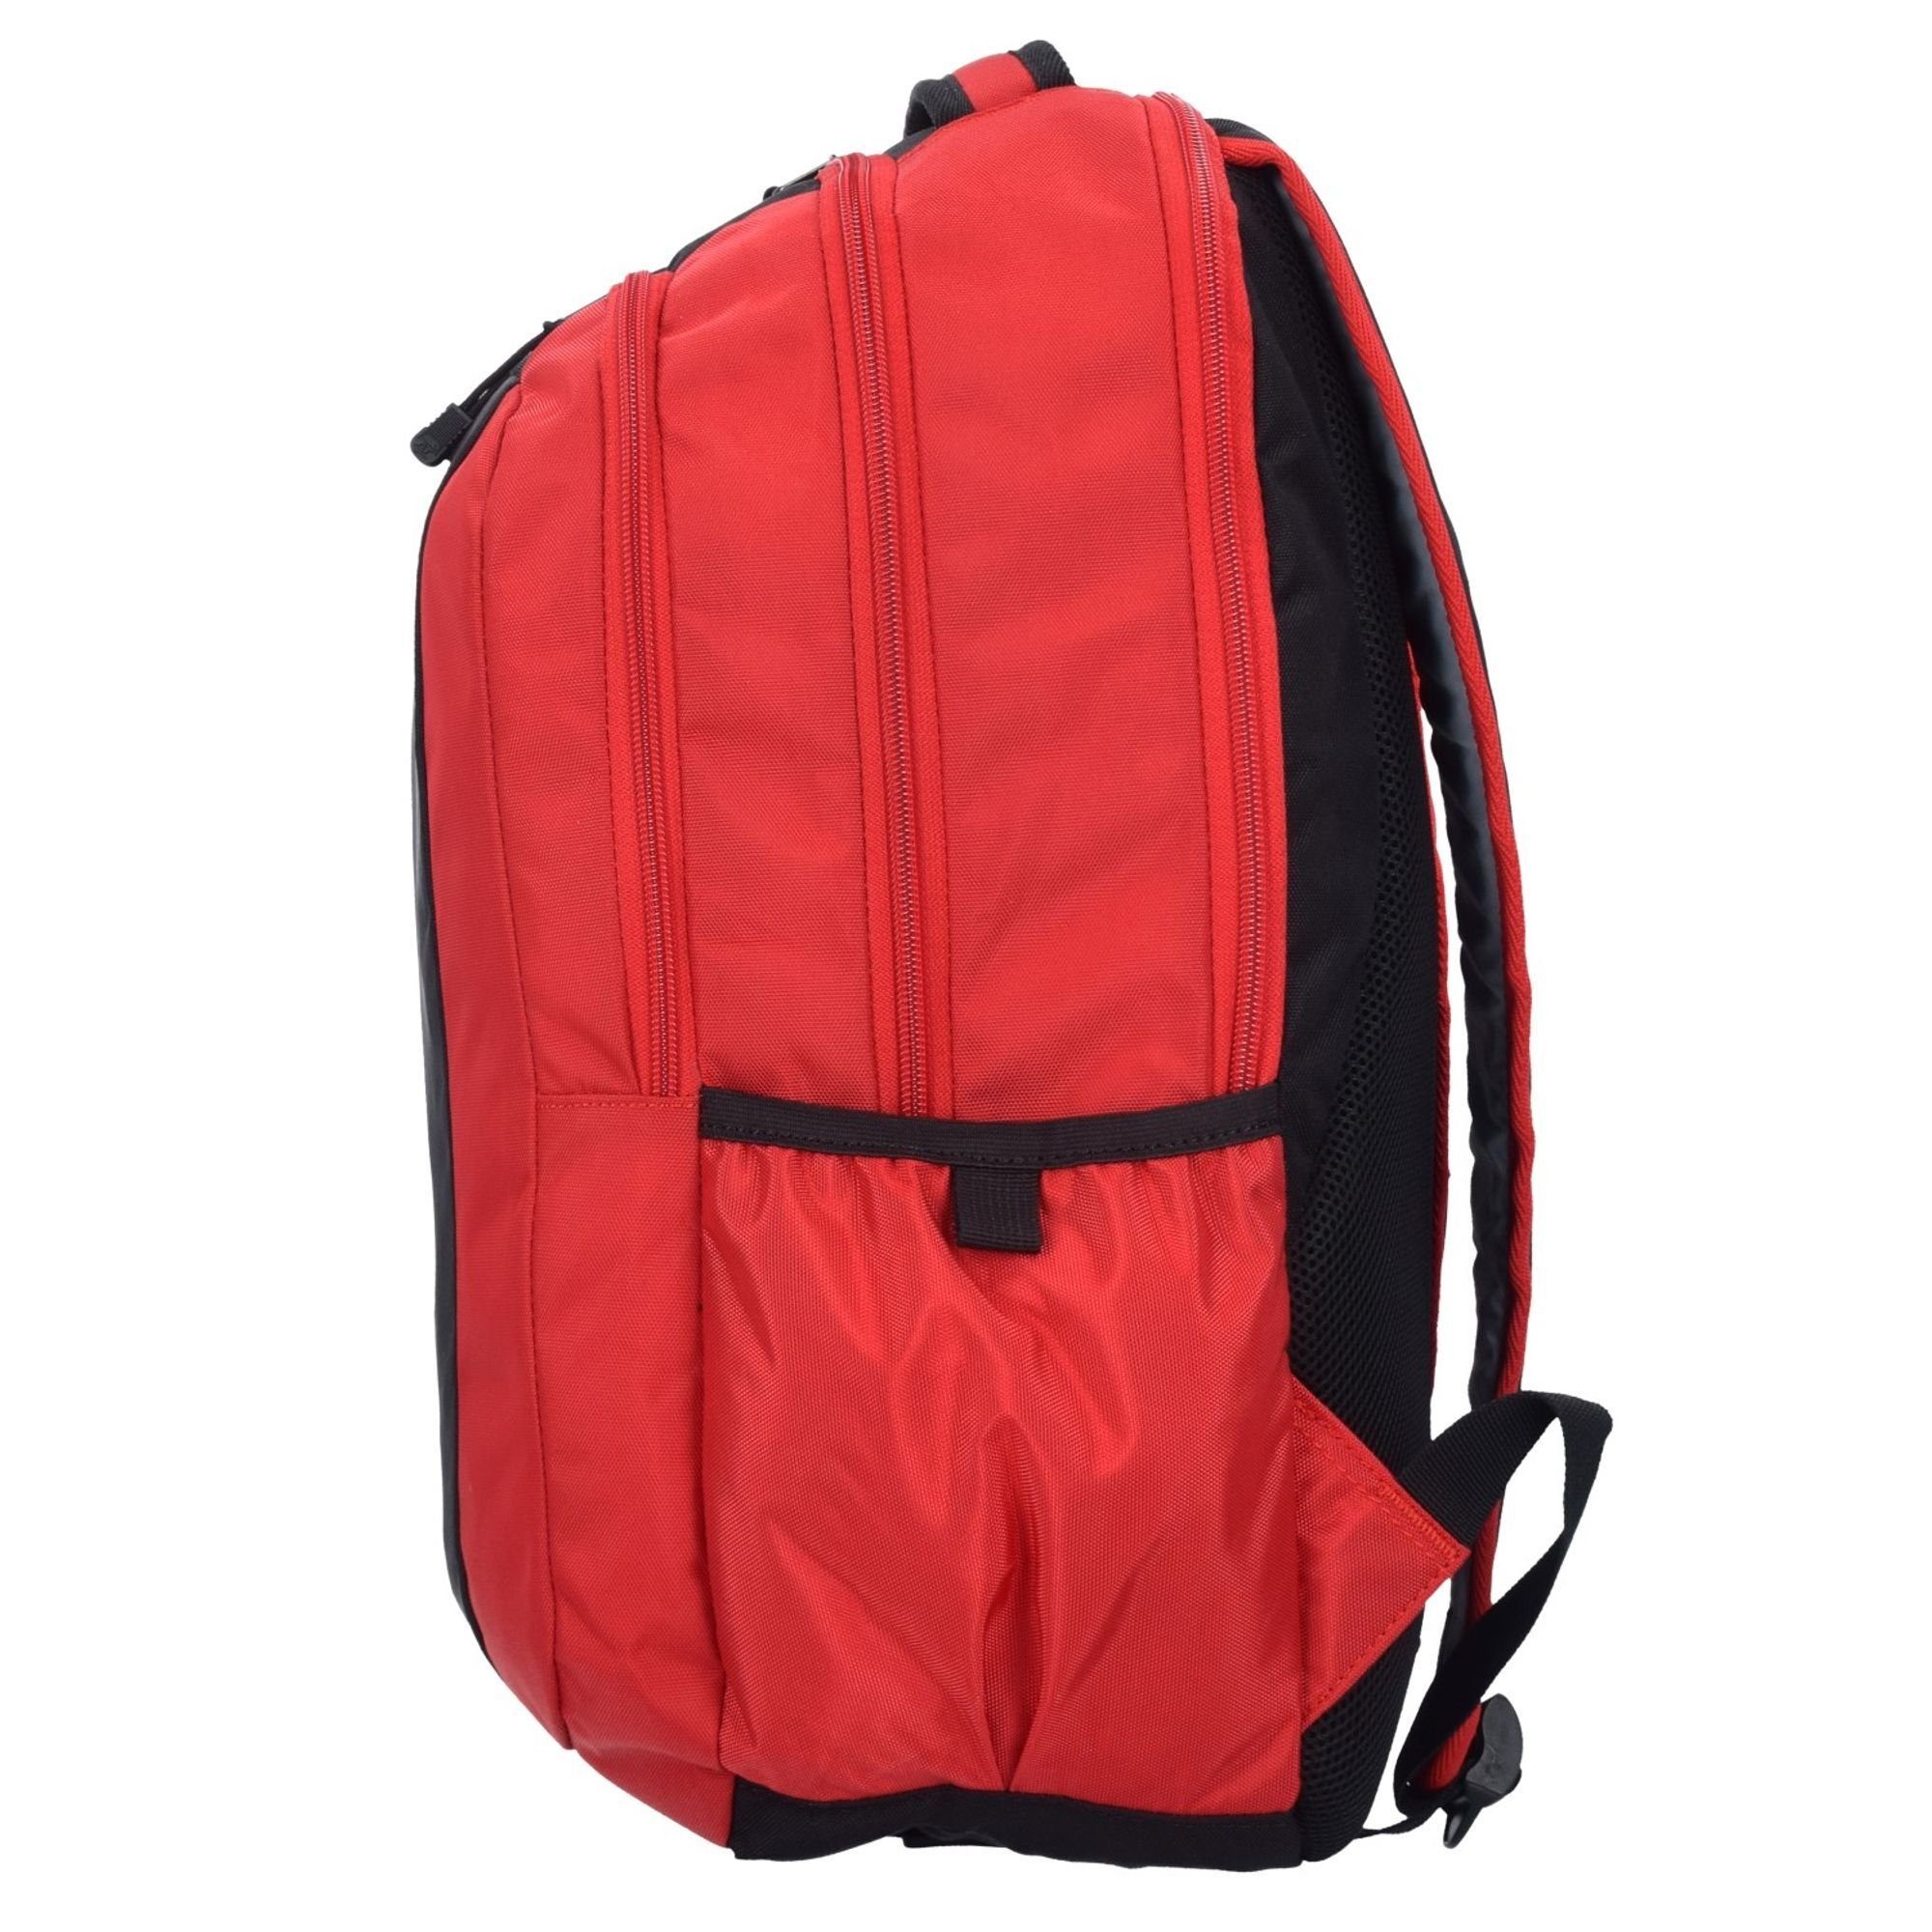 Polyester Groove, Urban red Tourister® Laptoprucksack American